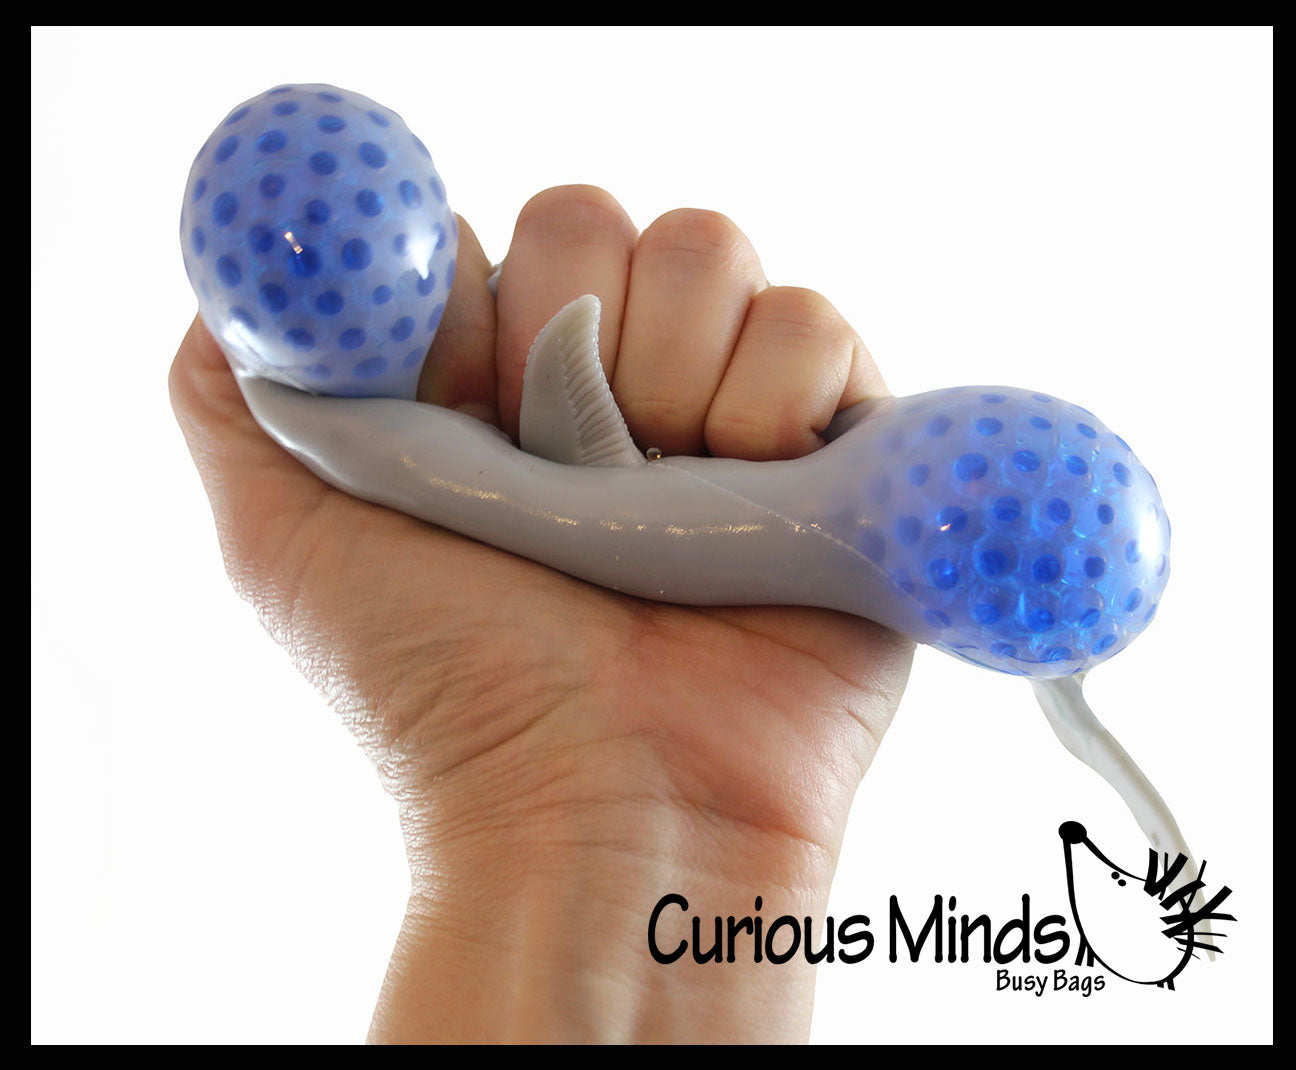 denise howie add photo water filled sex toy